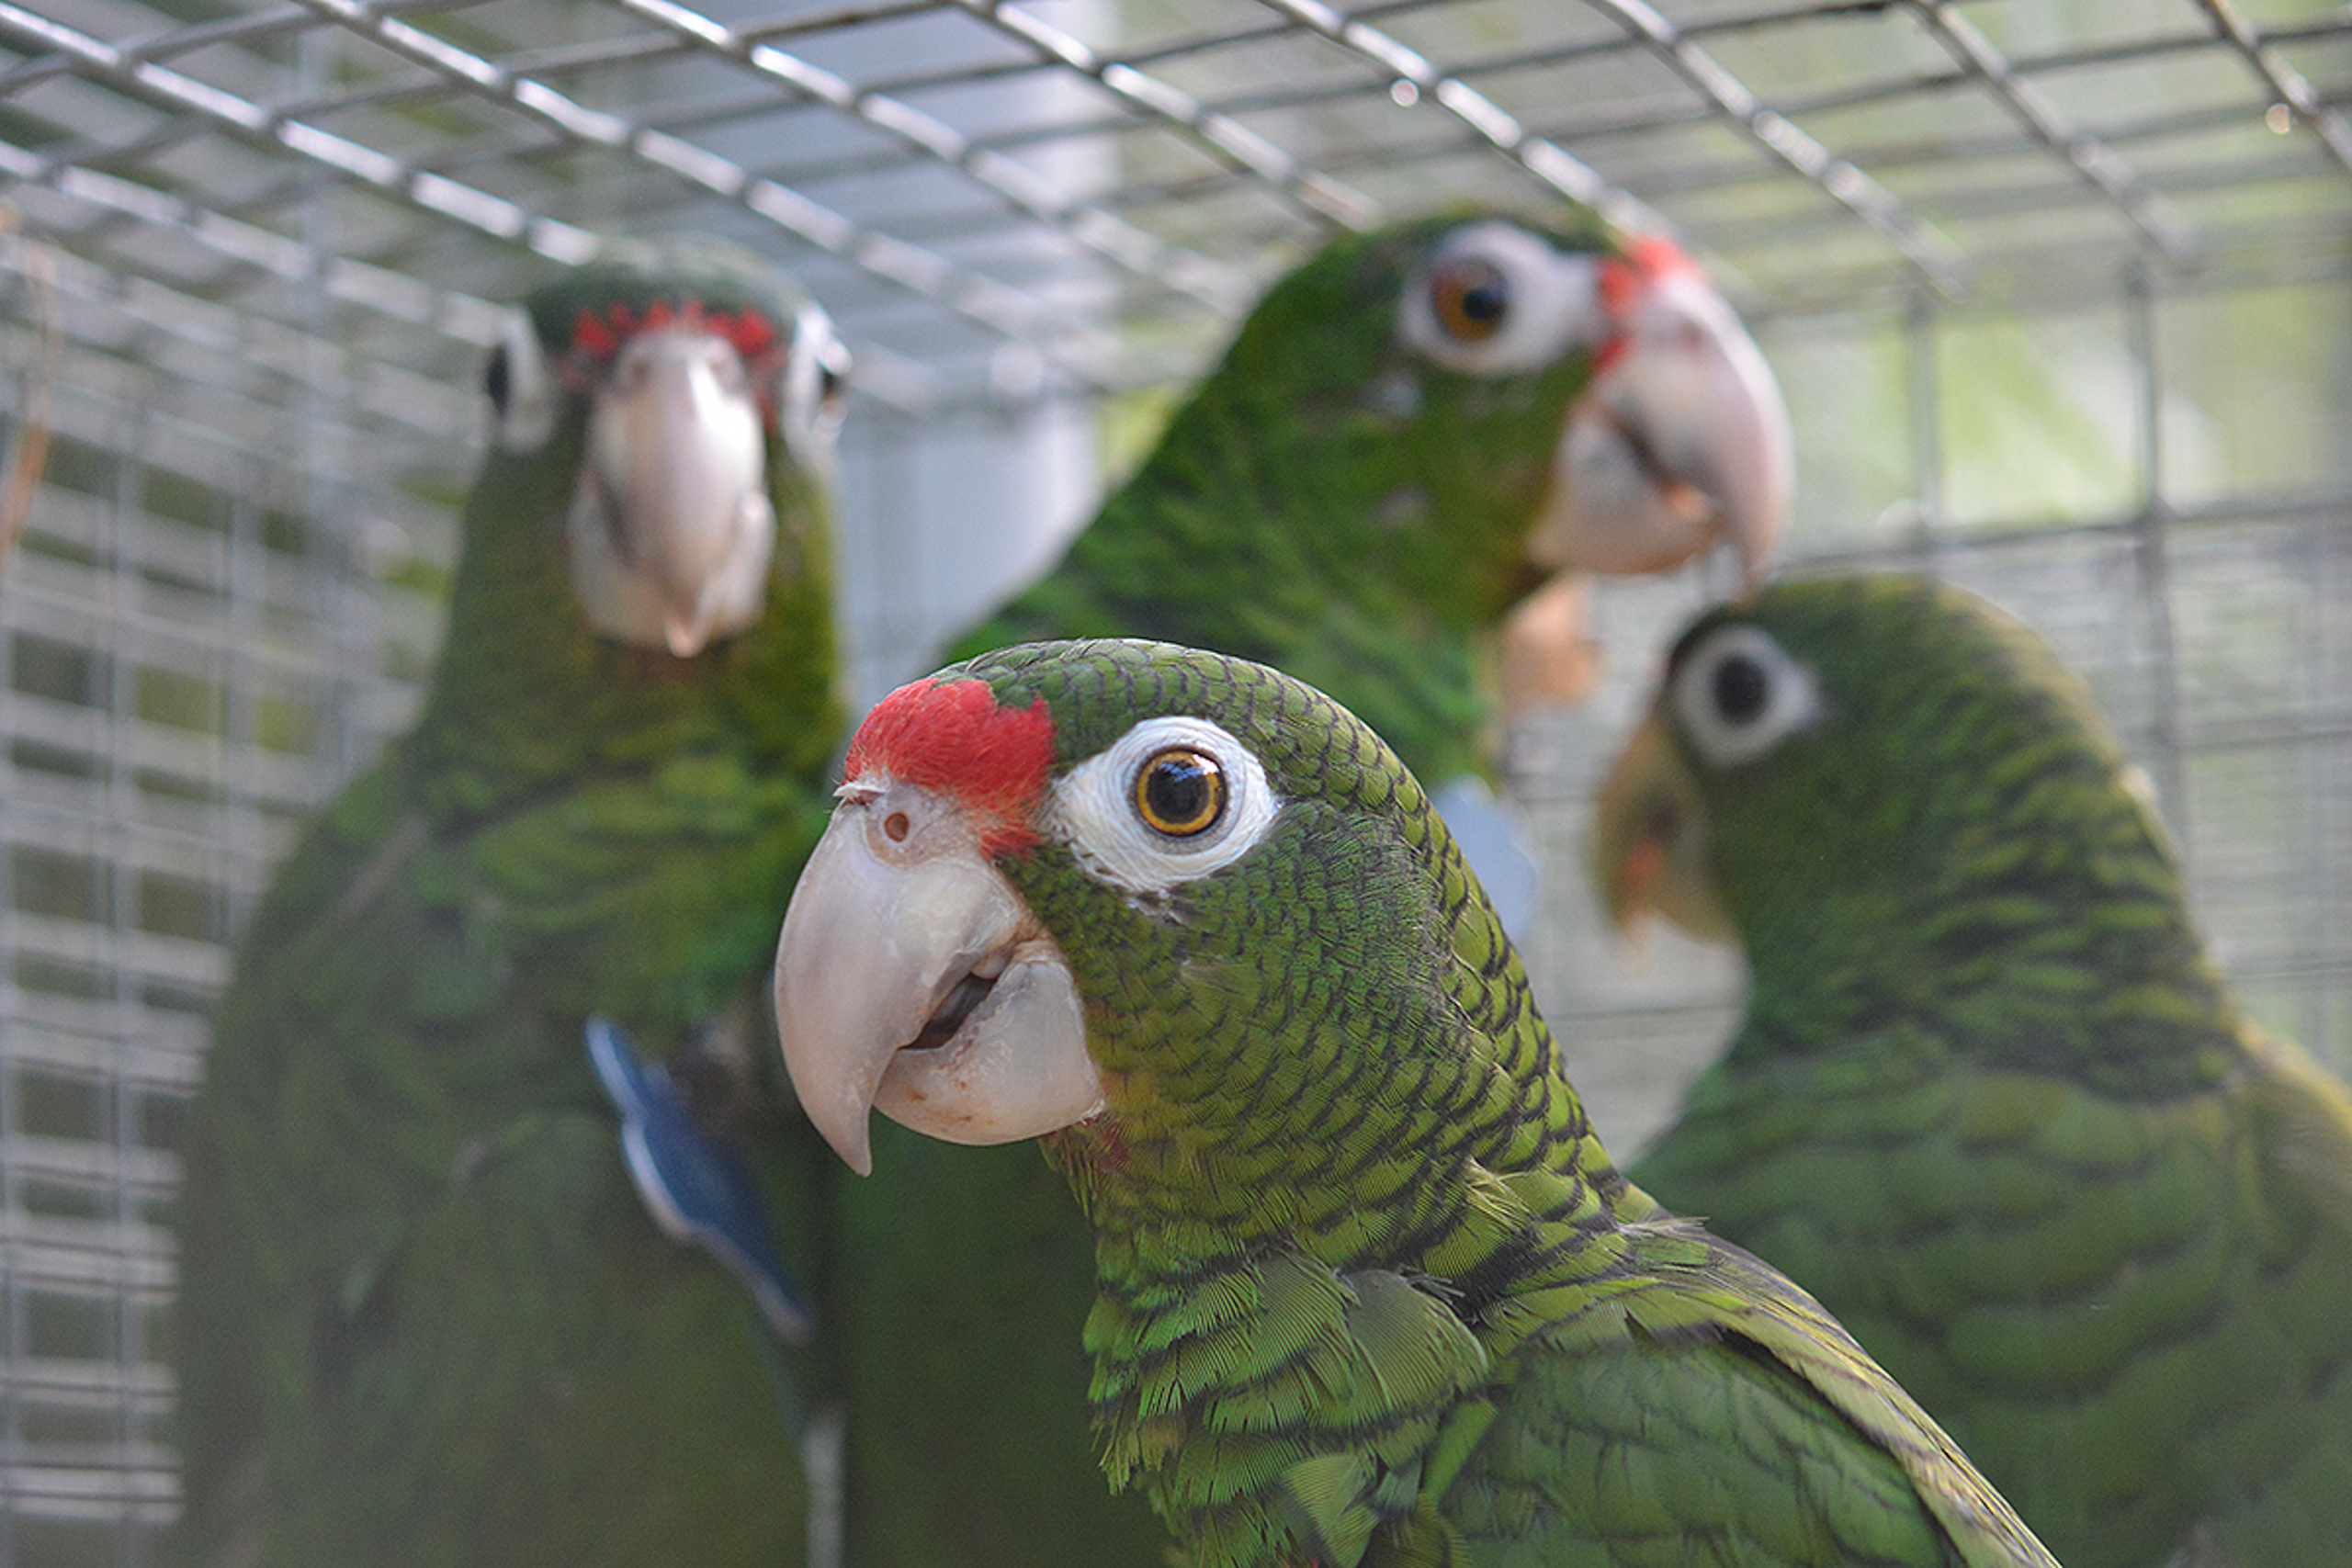 Group of four Puerto Rican parrots in a cage